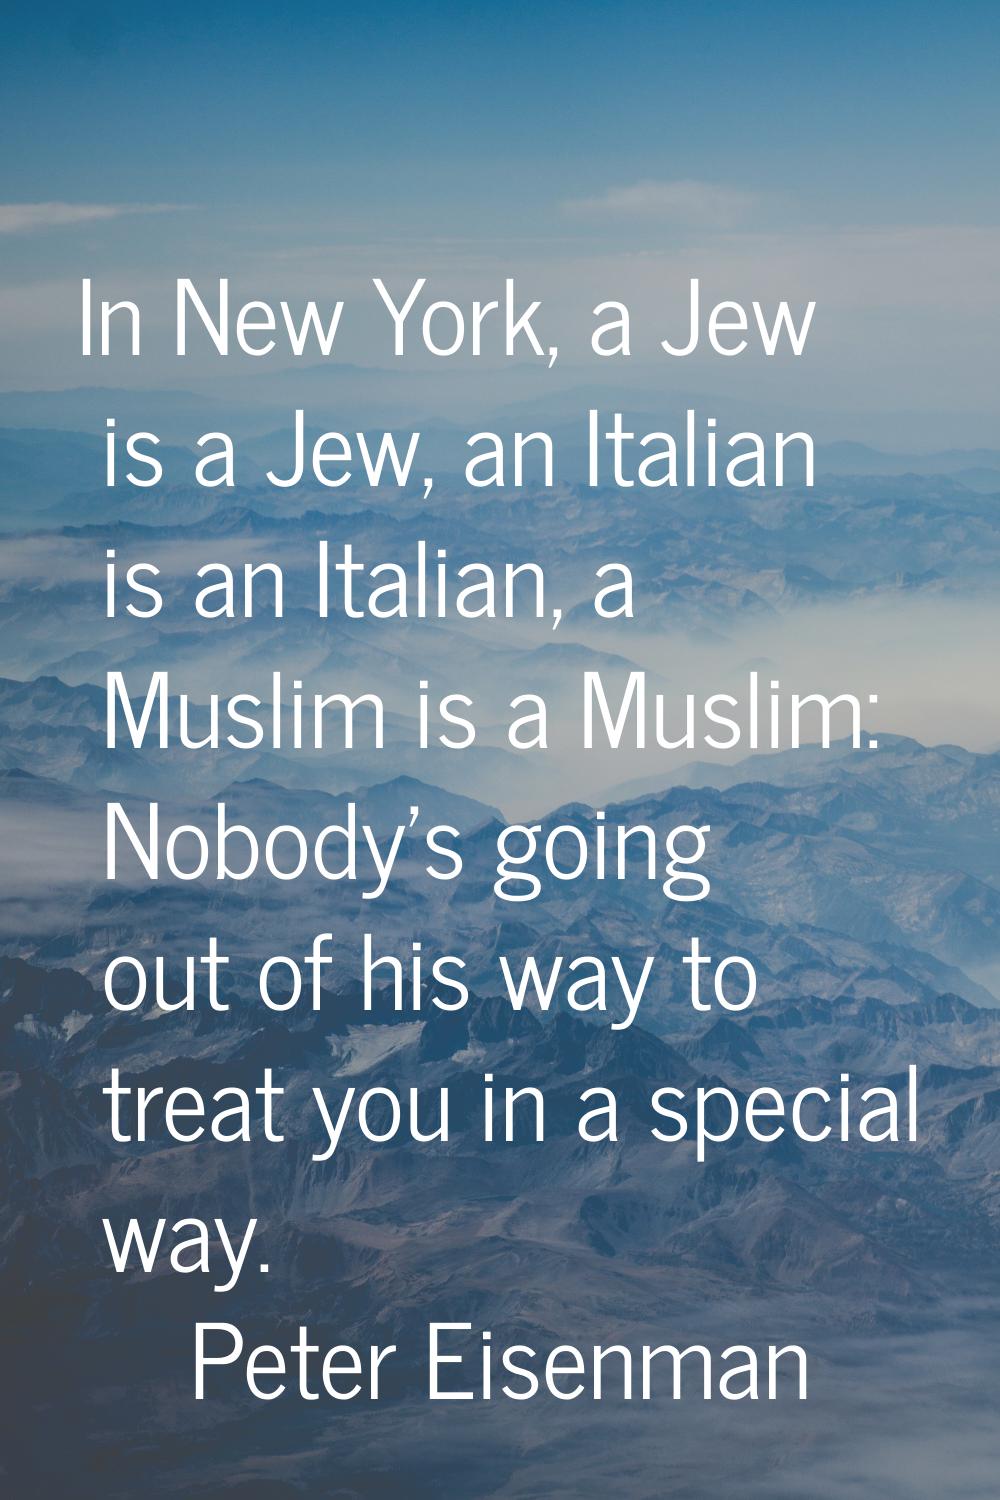 In New York, a Jew is a Jew, an Italian is an Italian, a Muslim is a Muslim: Nobody's going out of 